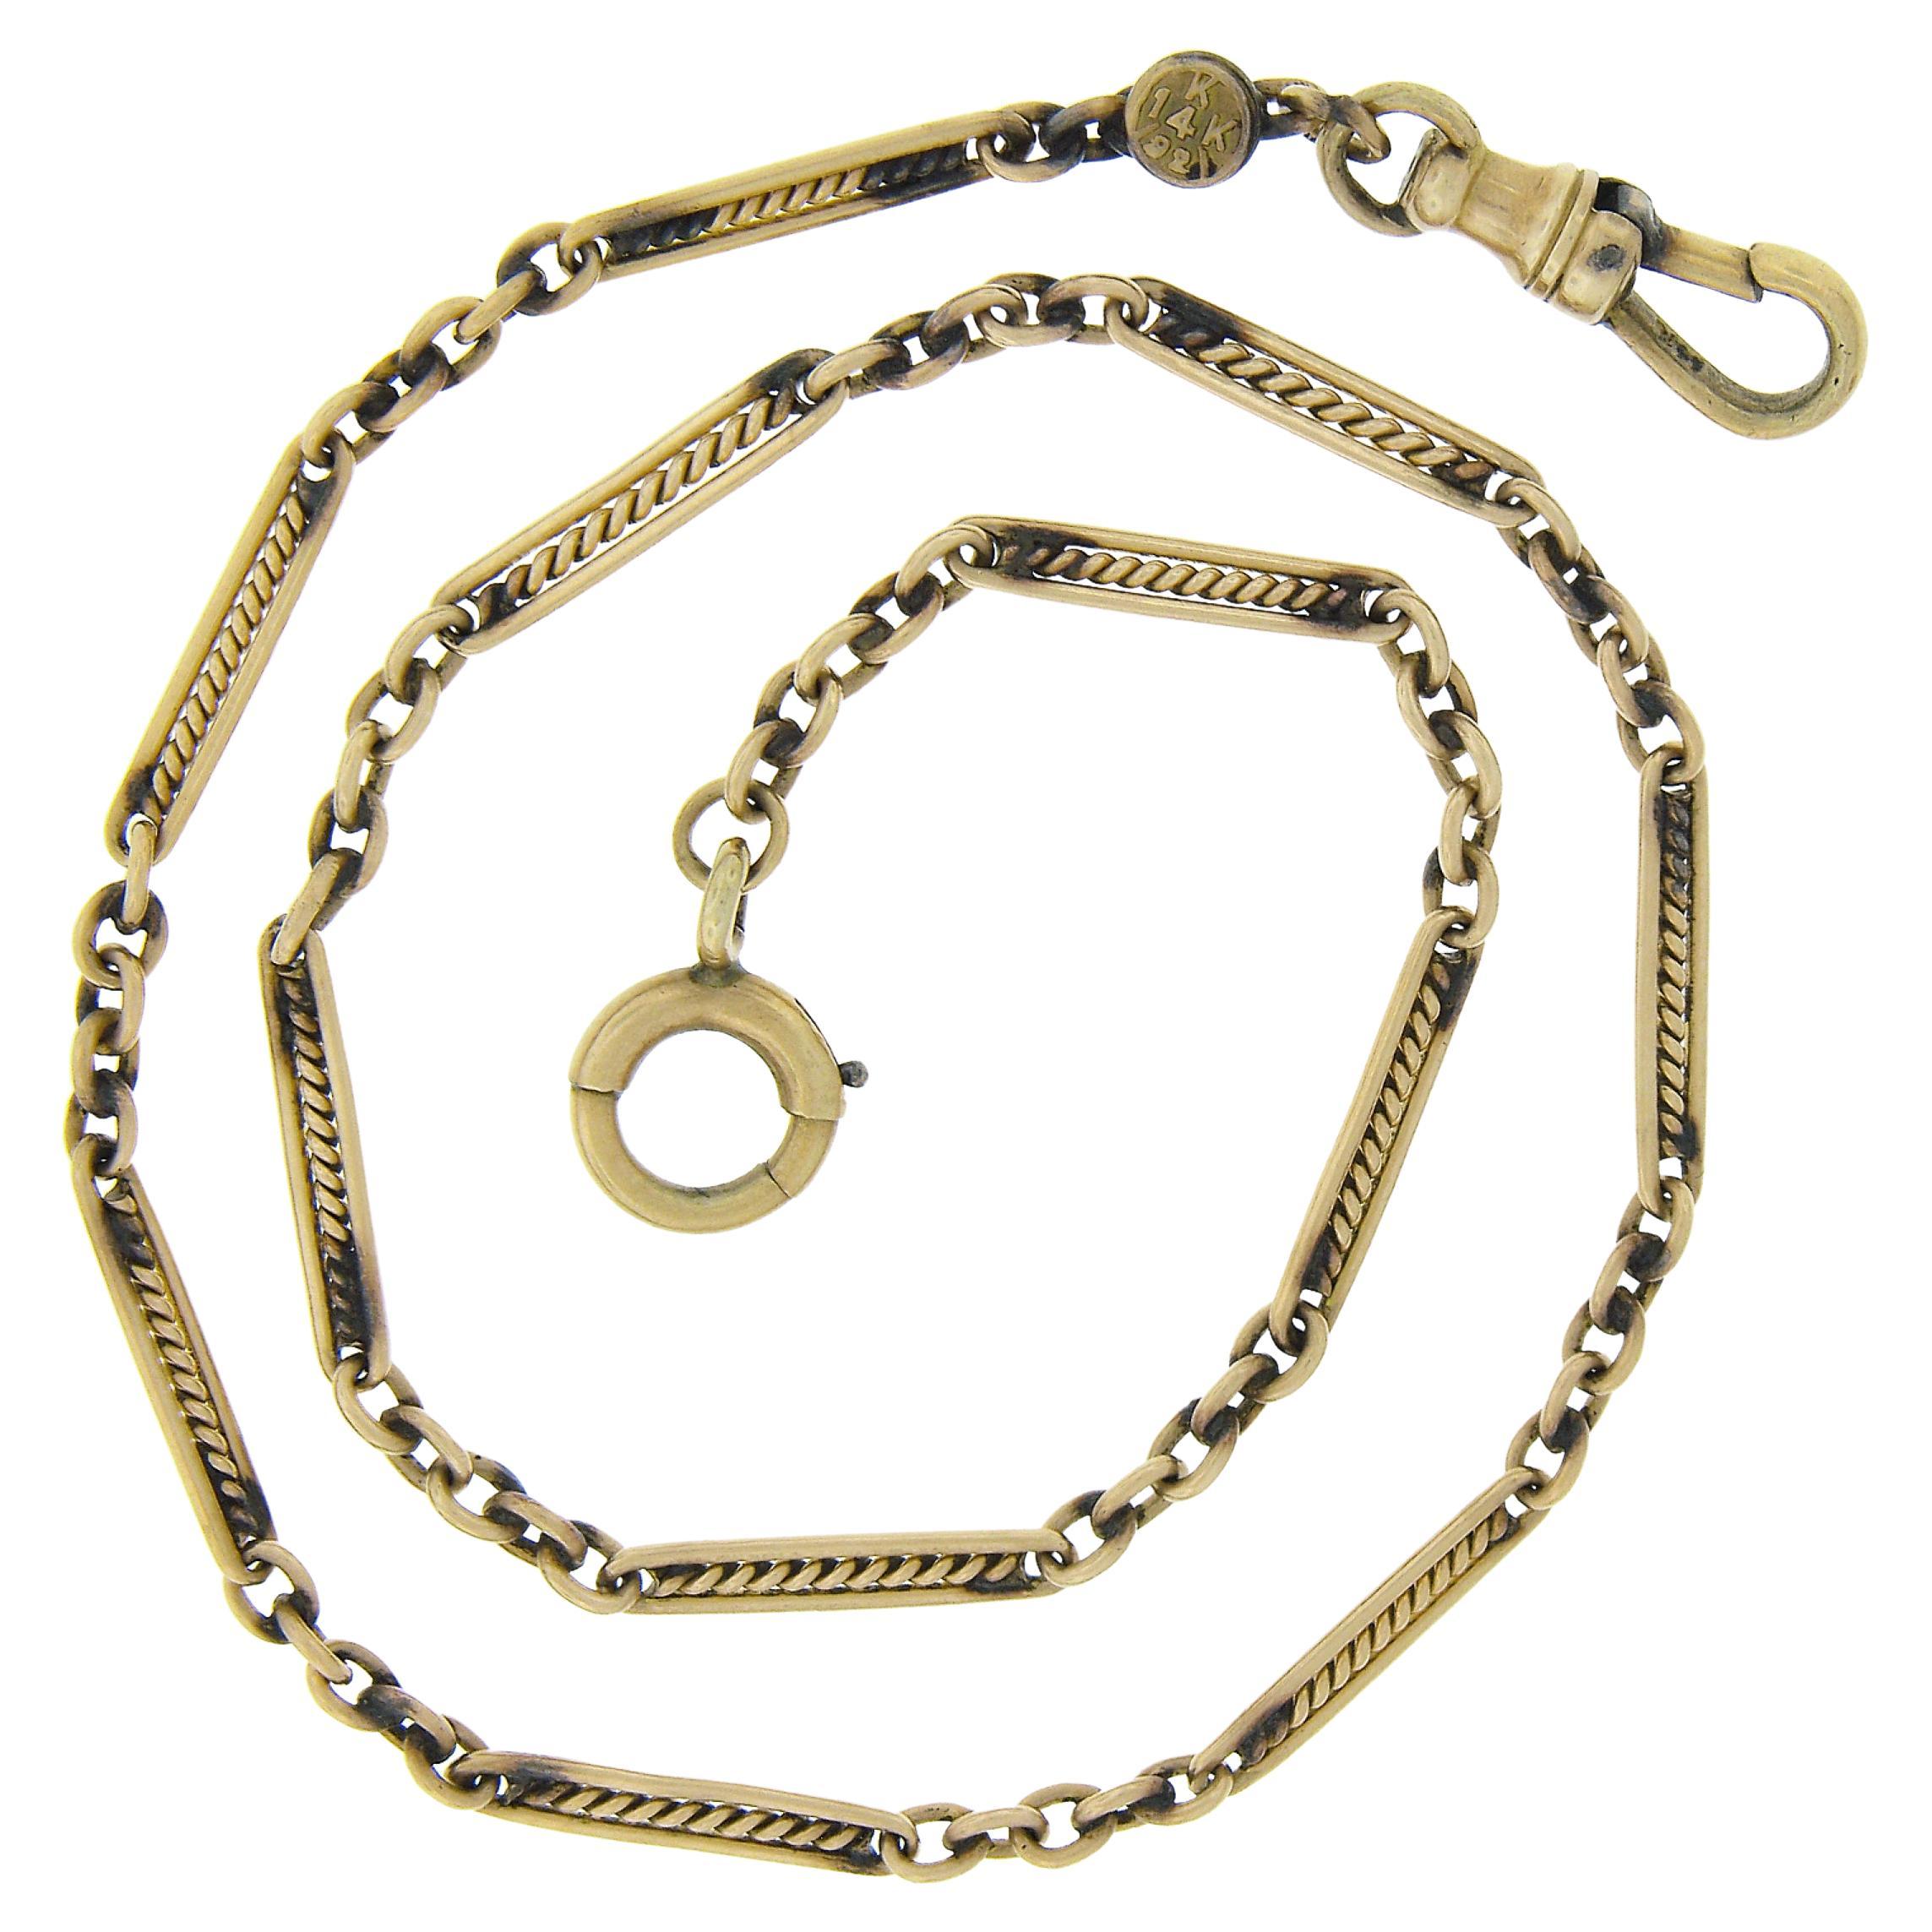 Antique 14k Gold 13" Pocket Watch Cable Link Chain w/ Dog Clip & Spring Ring For Sale